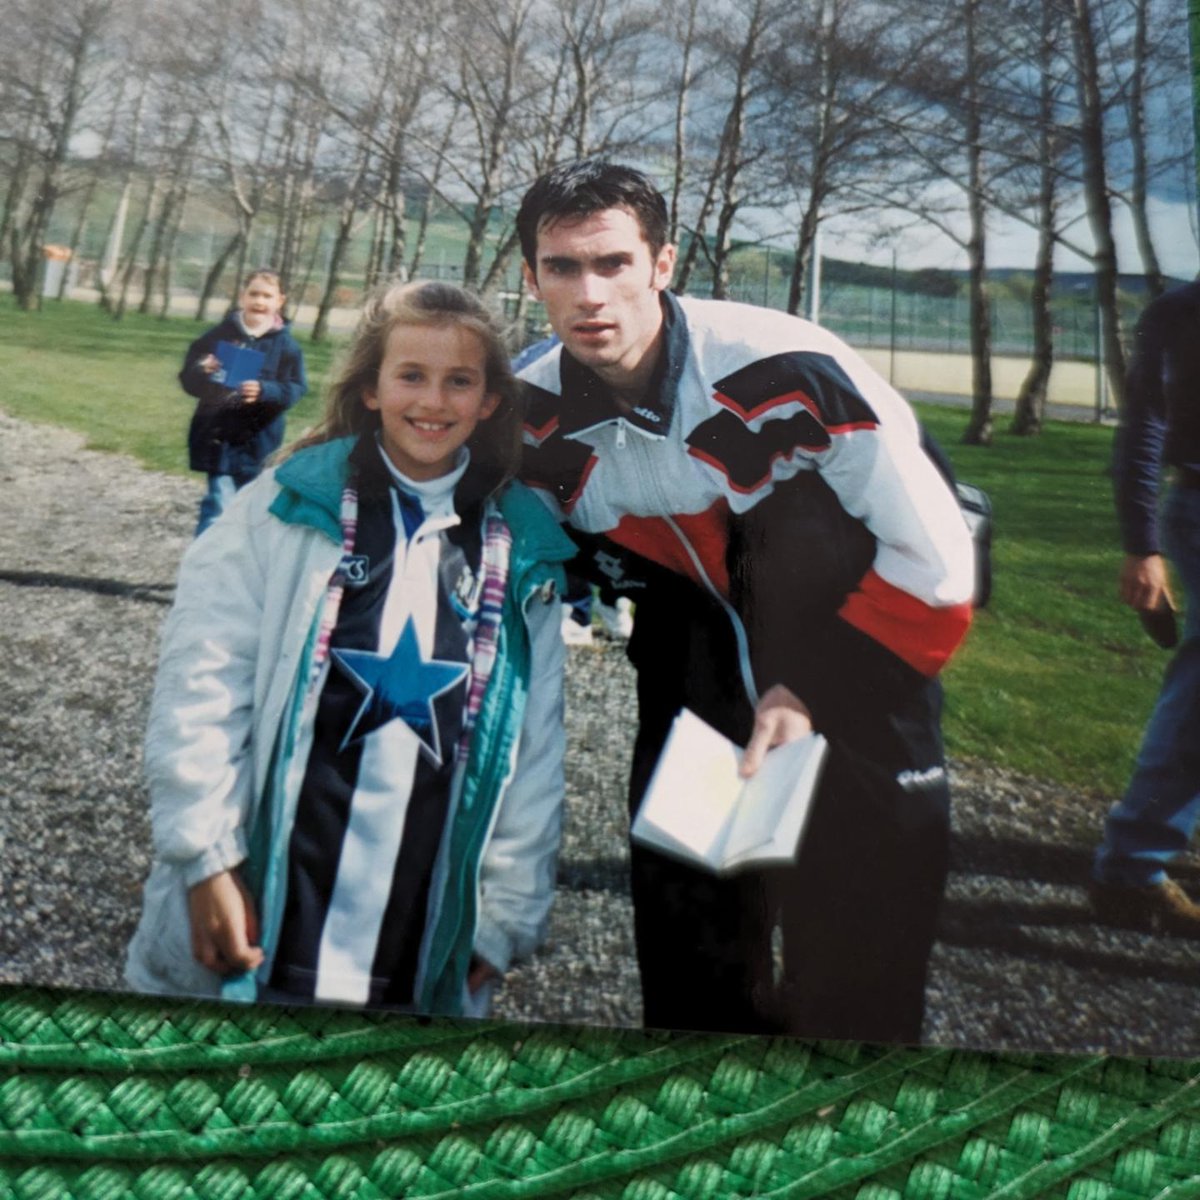 Buzzed my Mam found my autograph book. Yeah, I was that cool. 

Unearthed this pic of me and @KeithGillespie7 💕 I thought I'd misplaced it but no, I was keeping it in my cool autograph book 🤣

A few other gems too #NUFC #Newcastleunited #toon